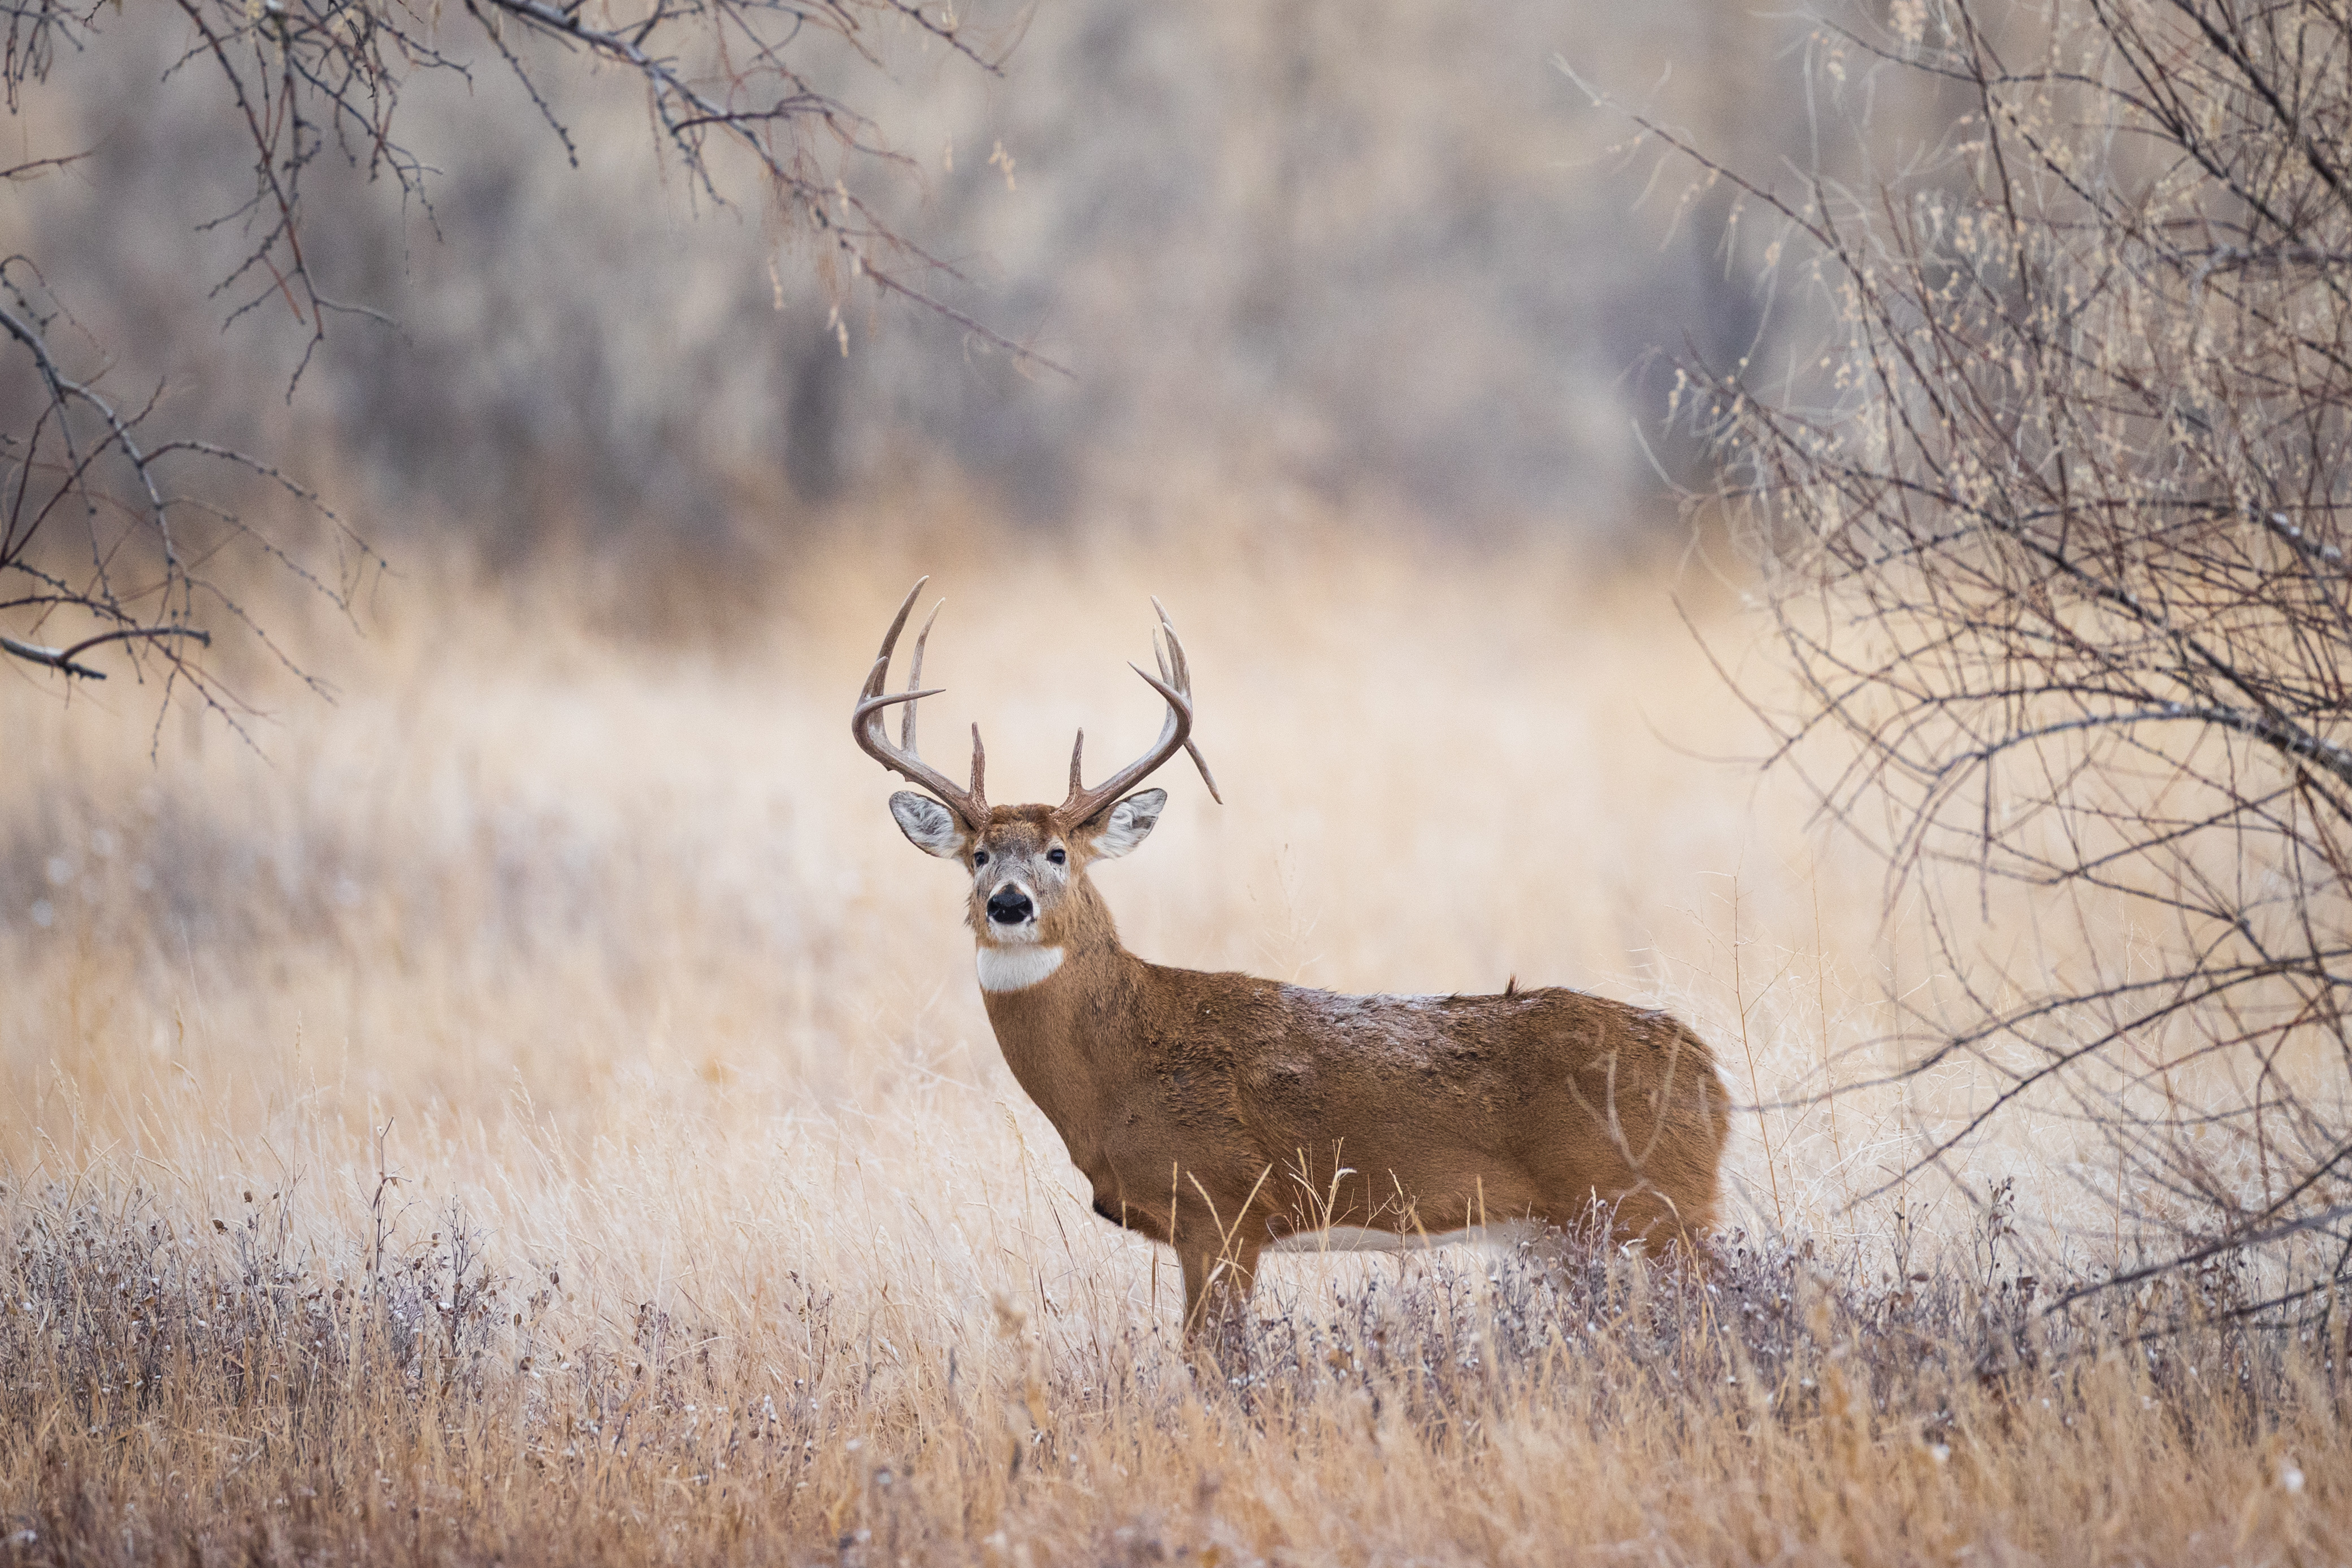 A deer in the field, hunter education concept. 